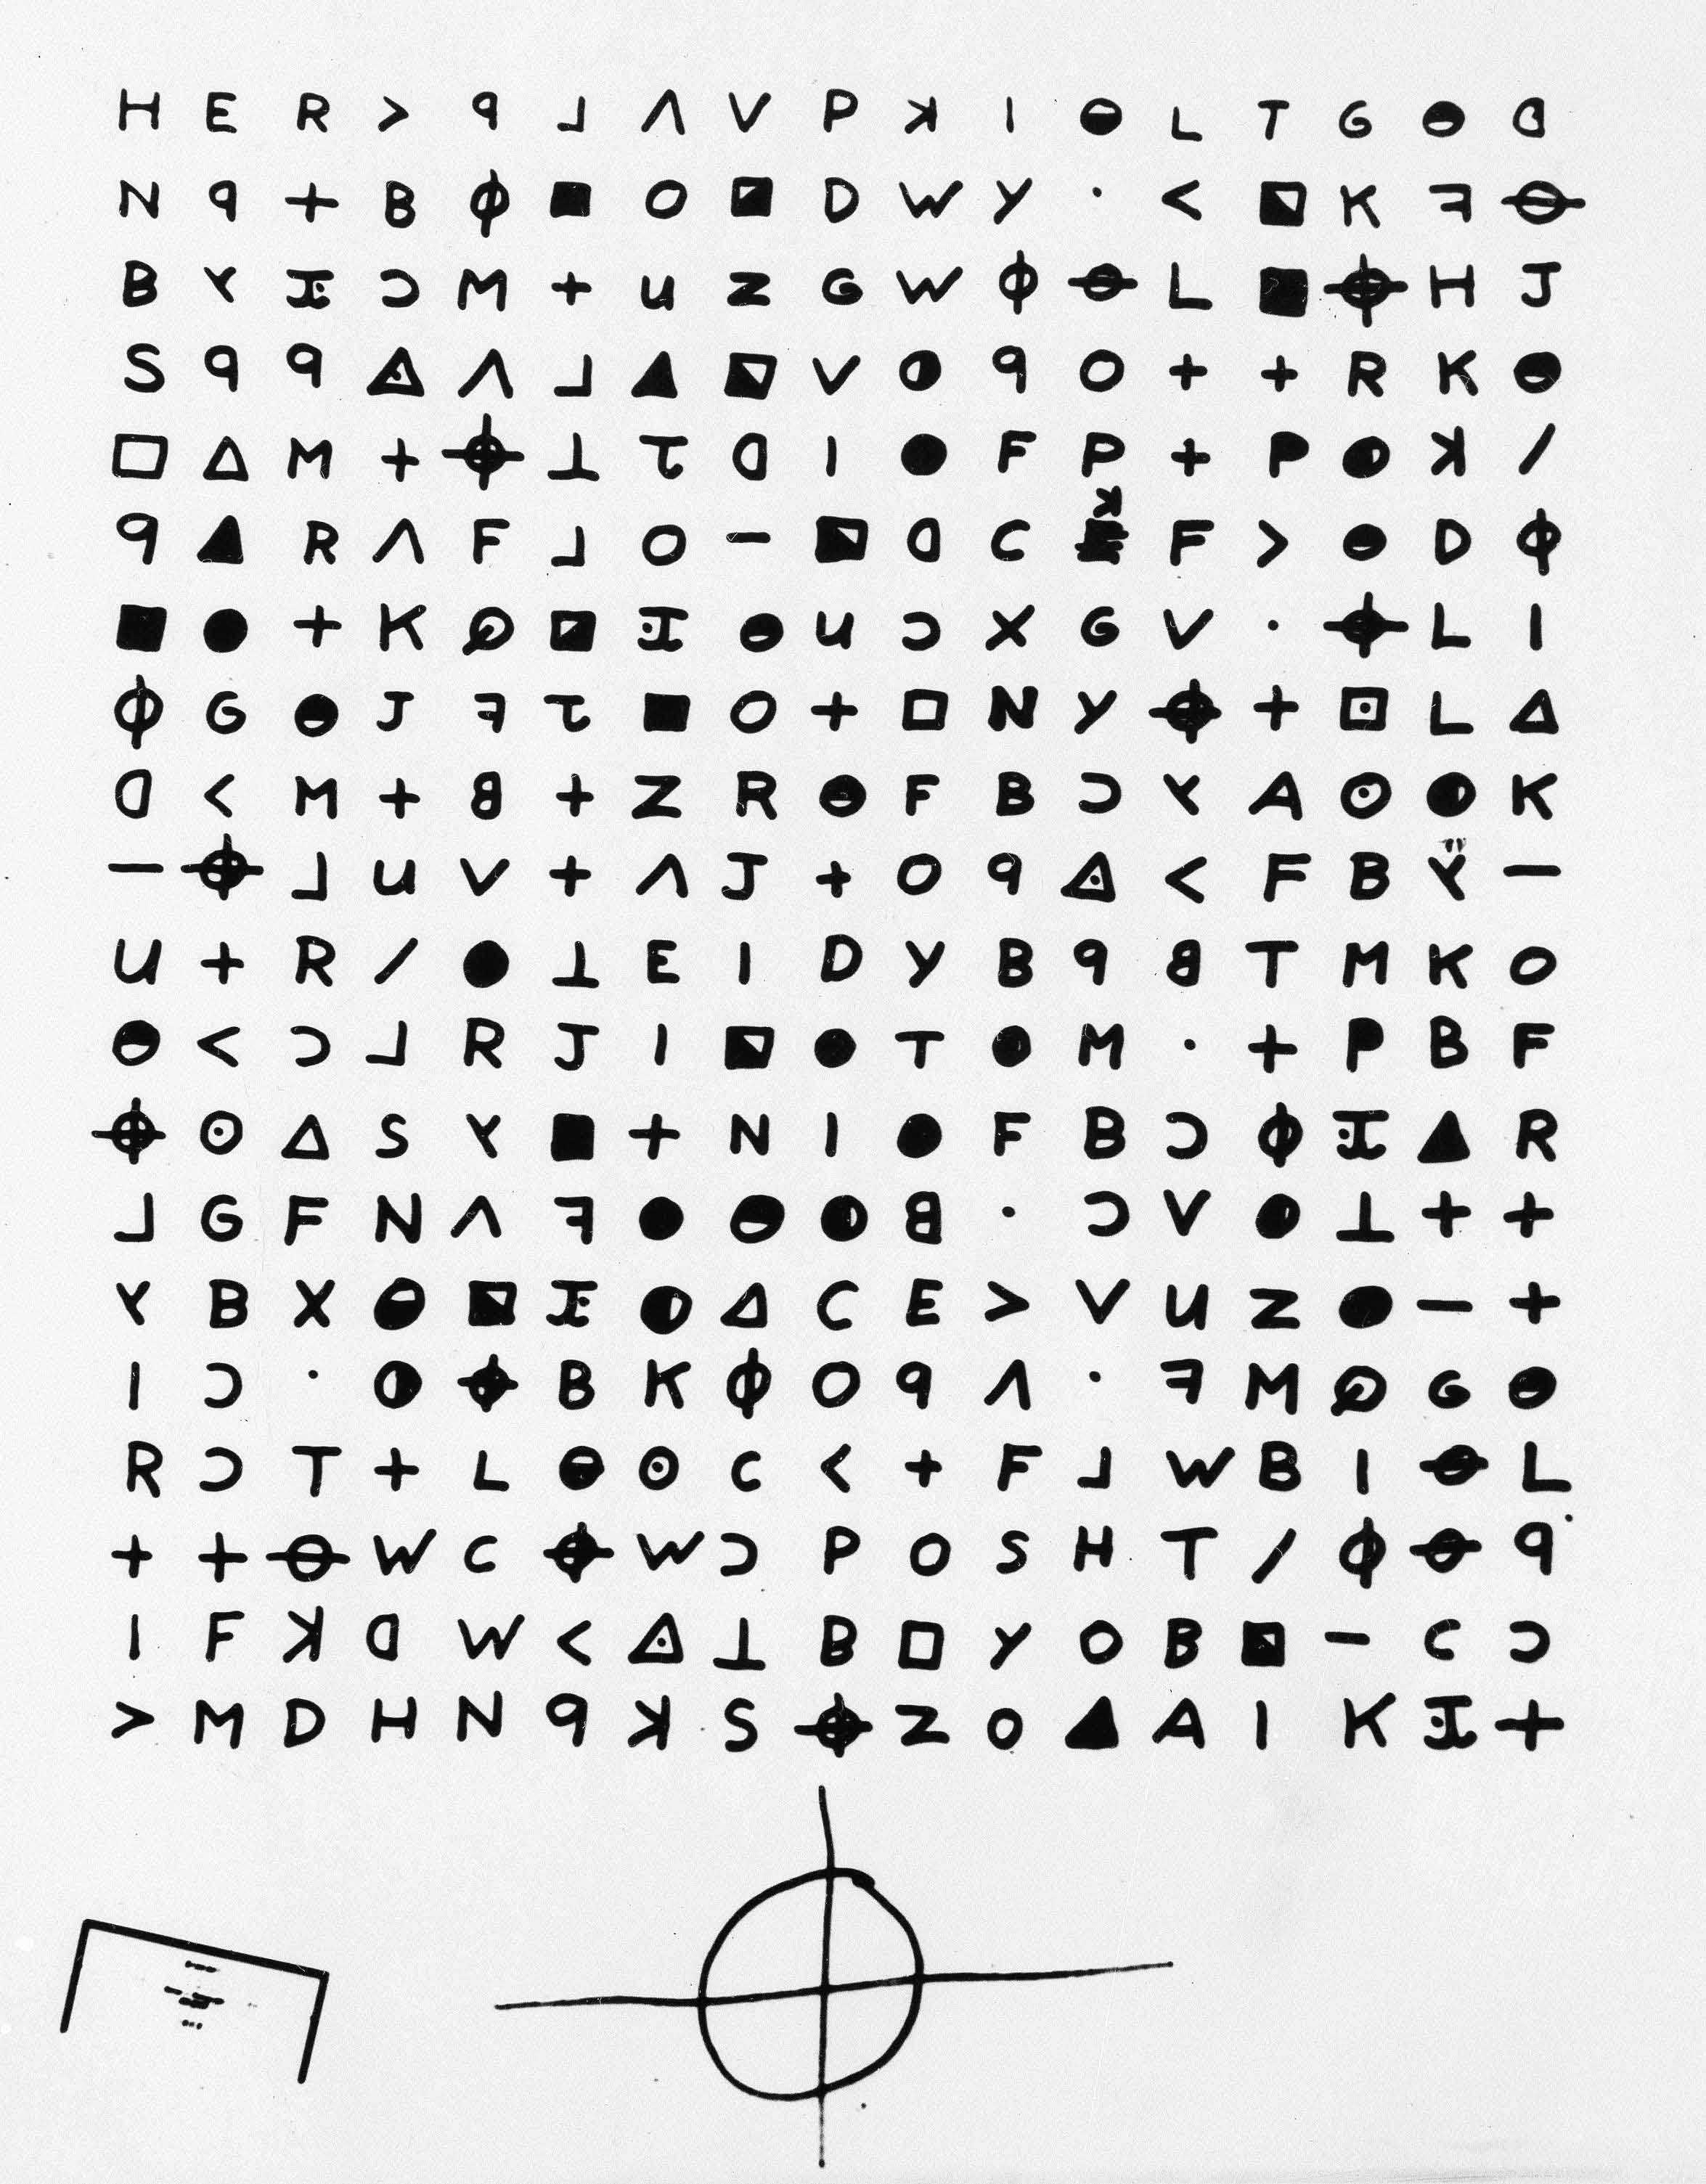 The Zodiac killer's 340 cipher went unsolved for 51 years.